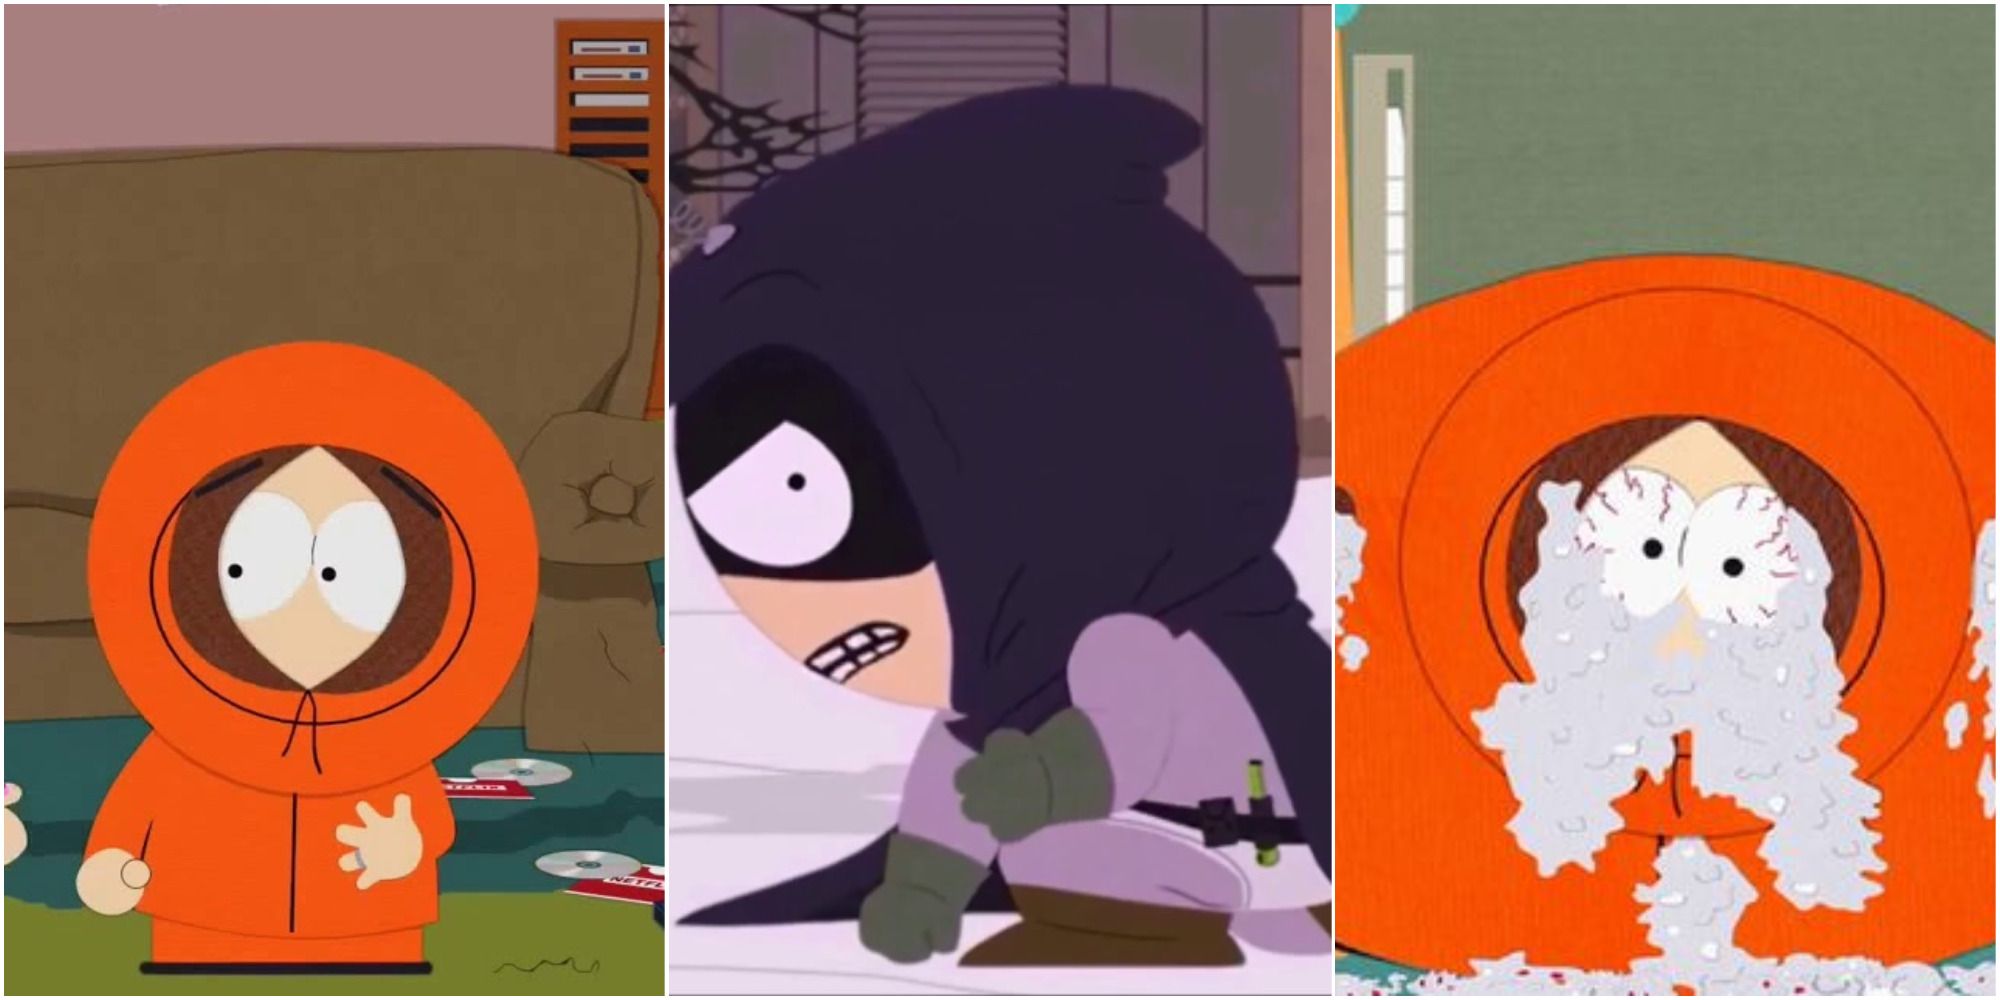 South Park 10 Most Gruesome Kenny Deaths Ranked